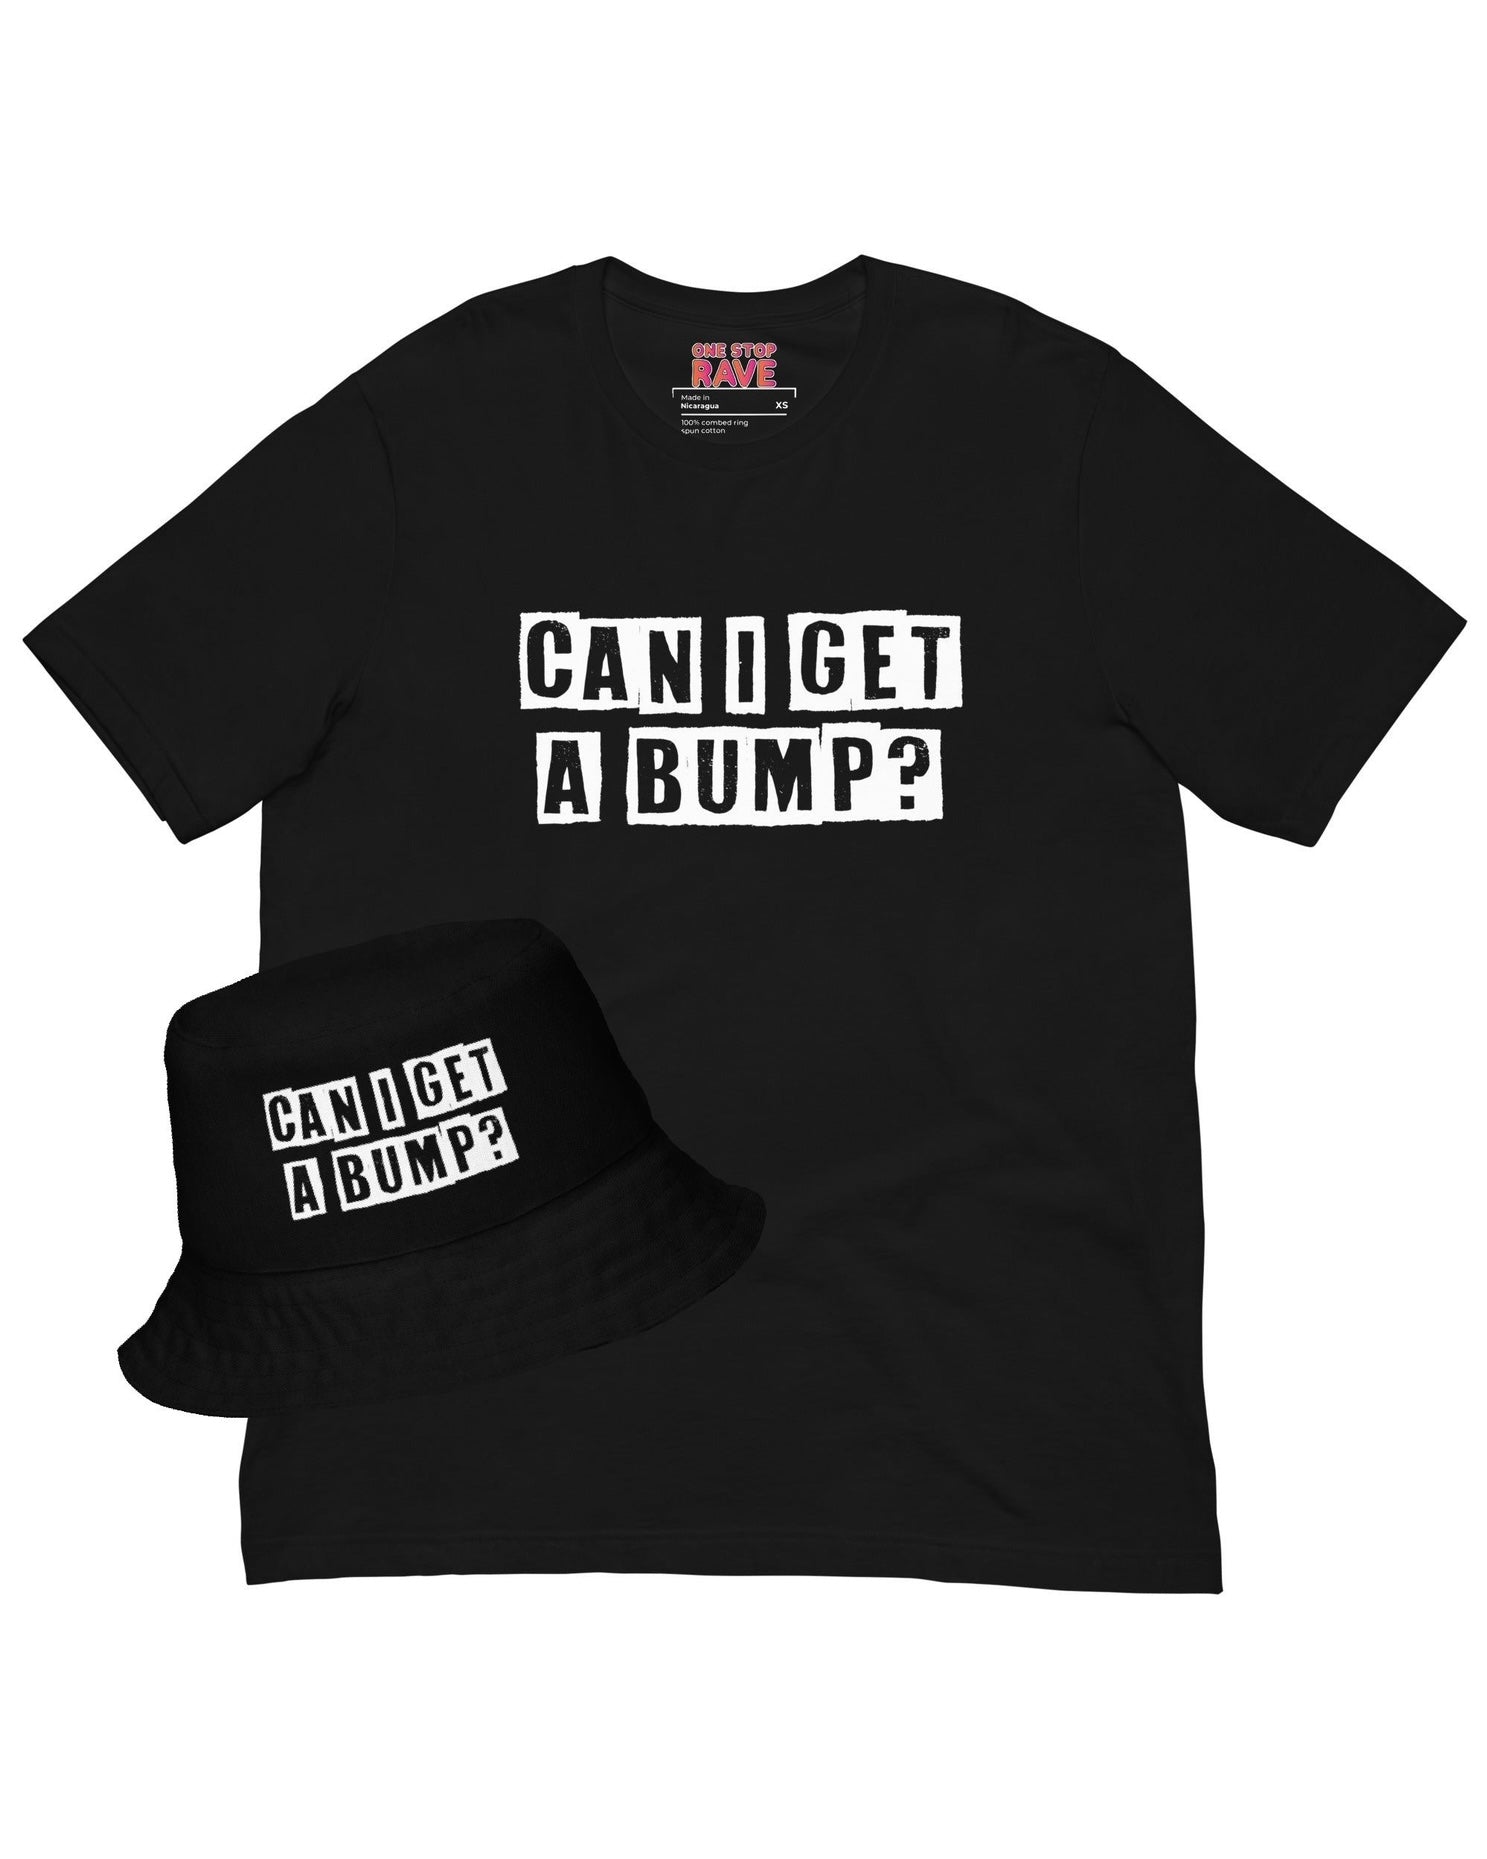 Black bucket hat & black t-shirt with the phrase "CAN I GET A BUMP?".